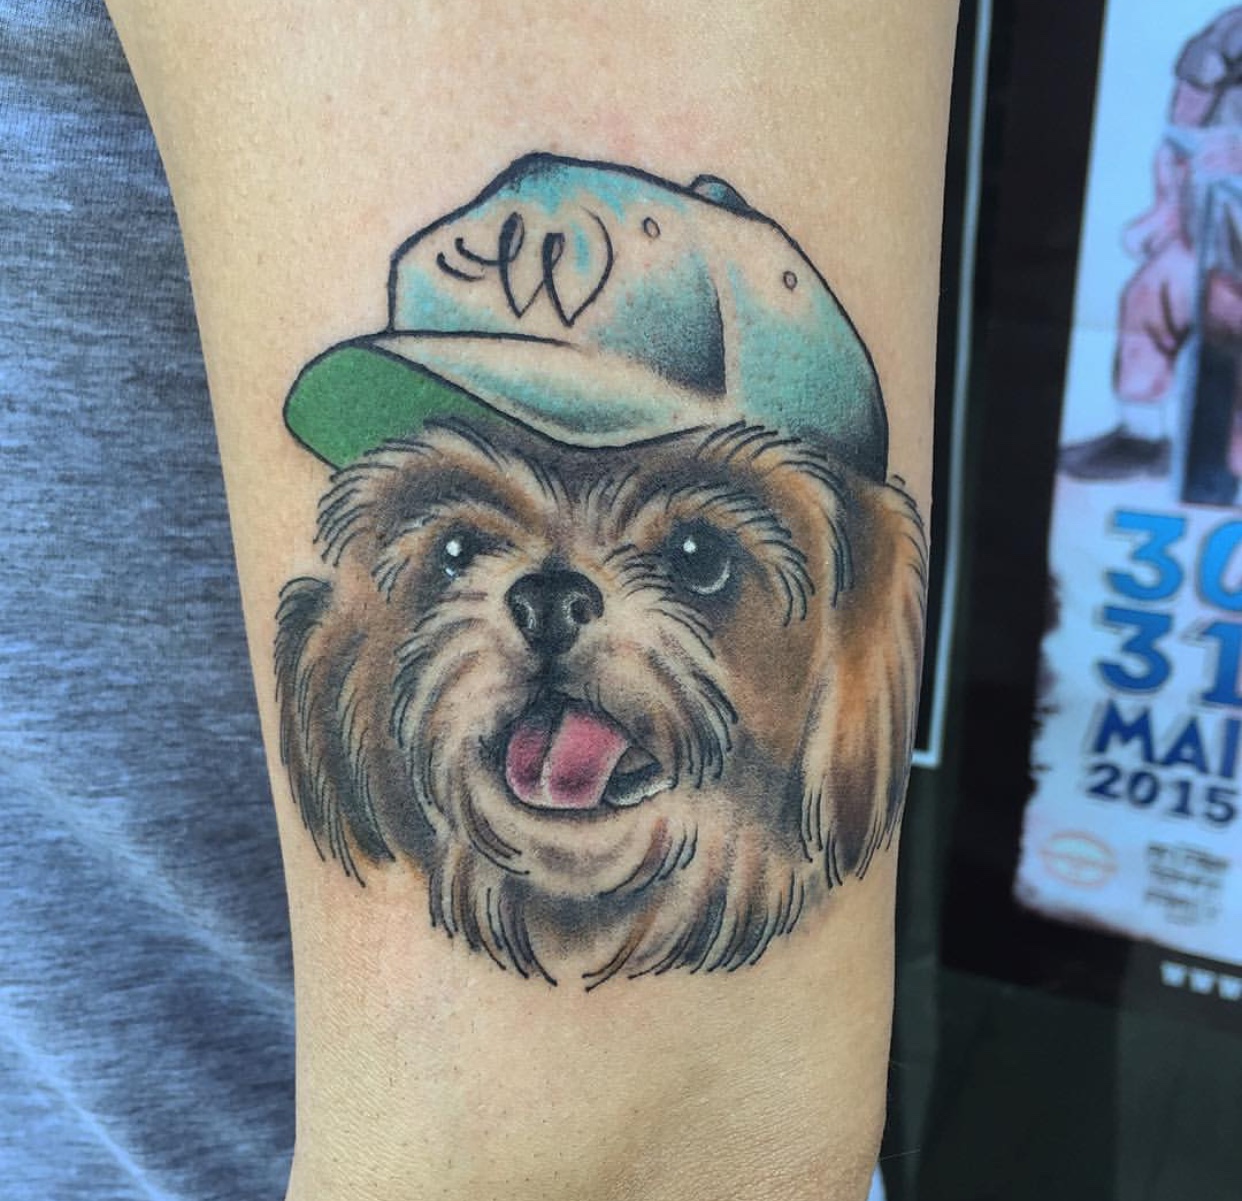 Shih Tzu wearing a cap on its head tattoo on the forearm